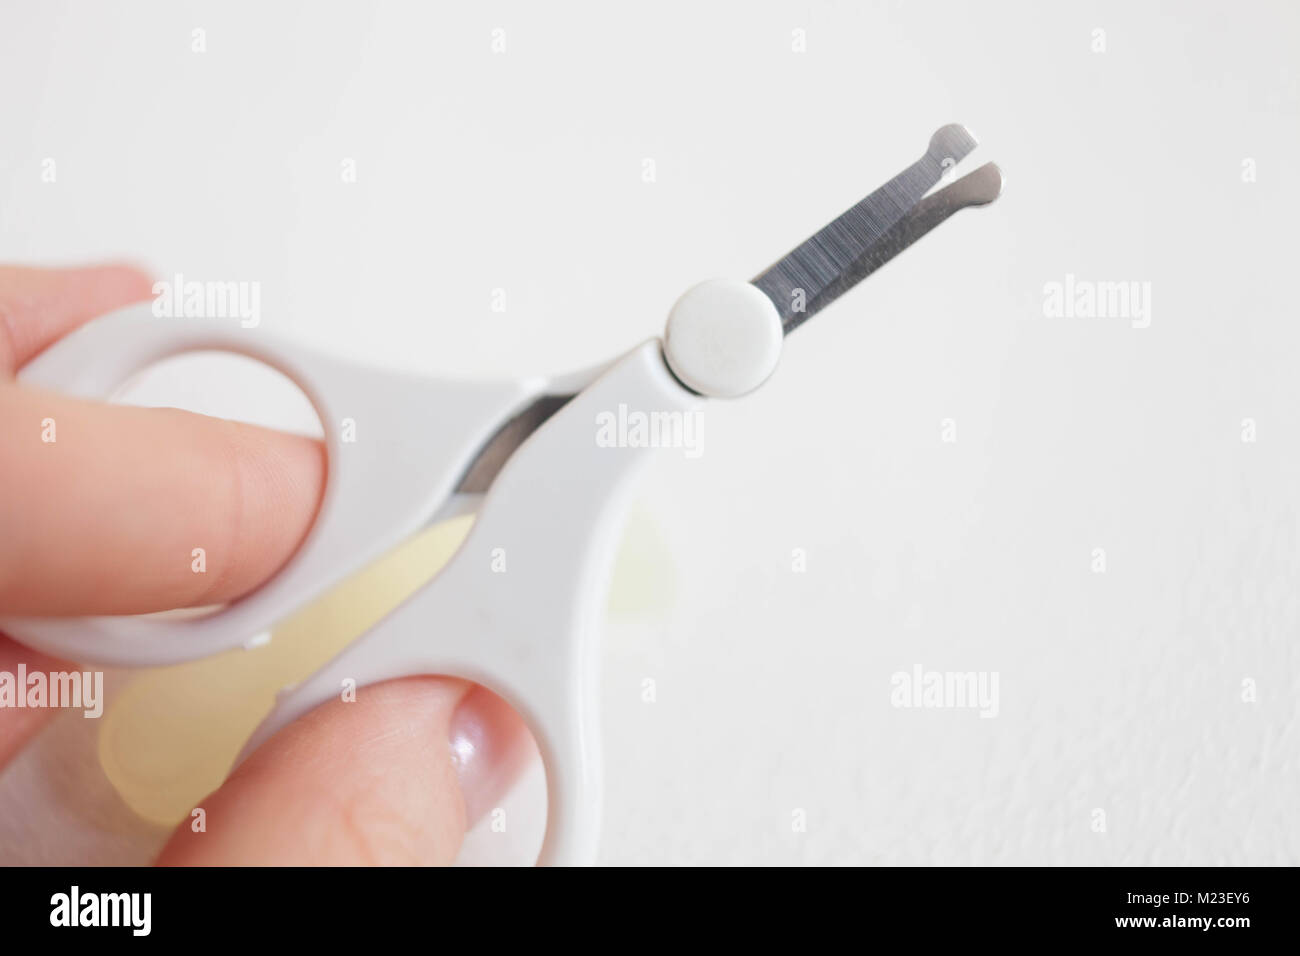 Baby scissors with rounded ends in the hands of his mother on a white background. Stock Photo